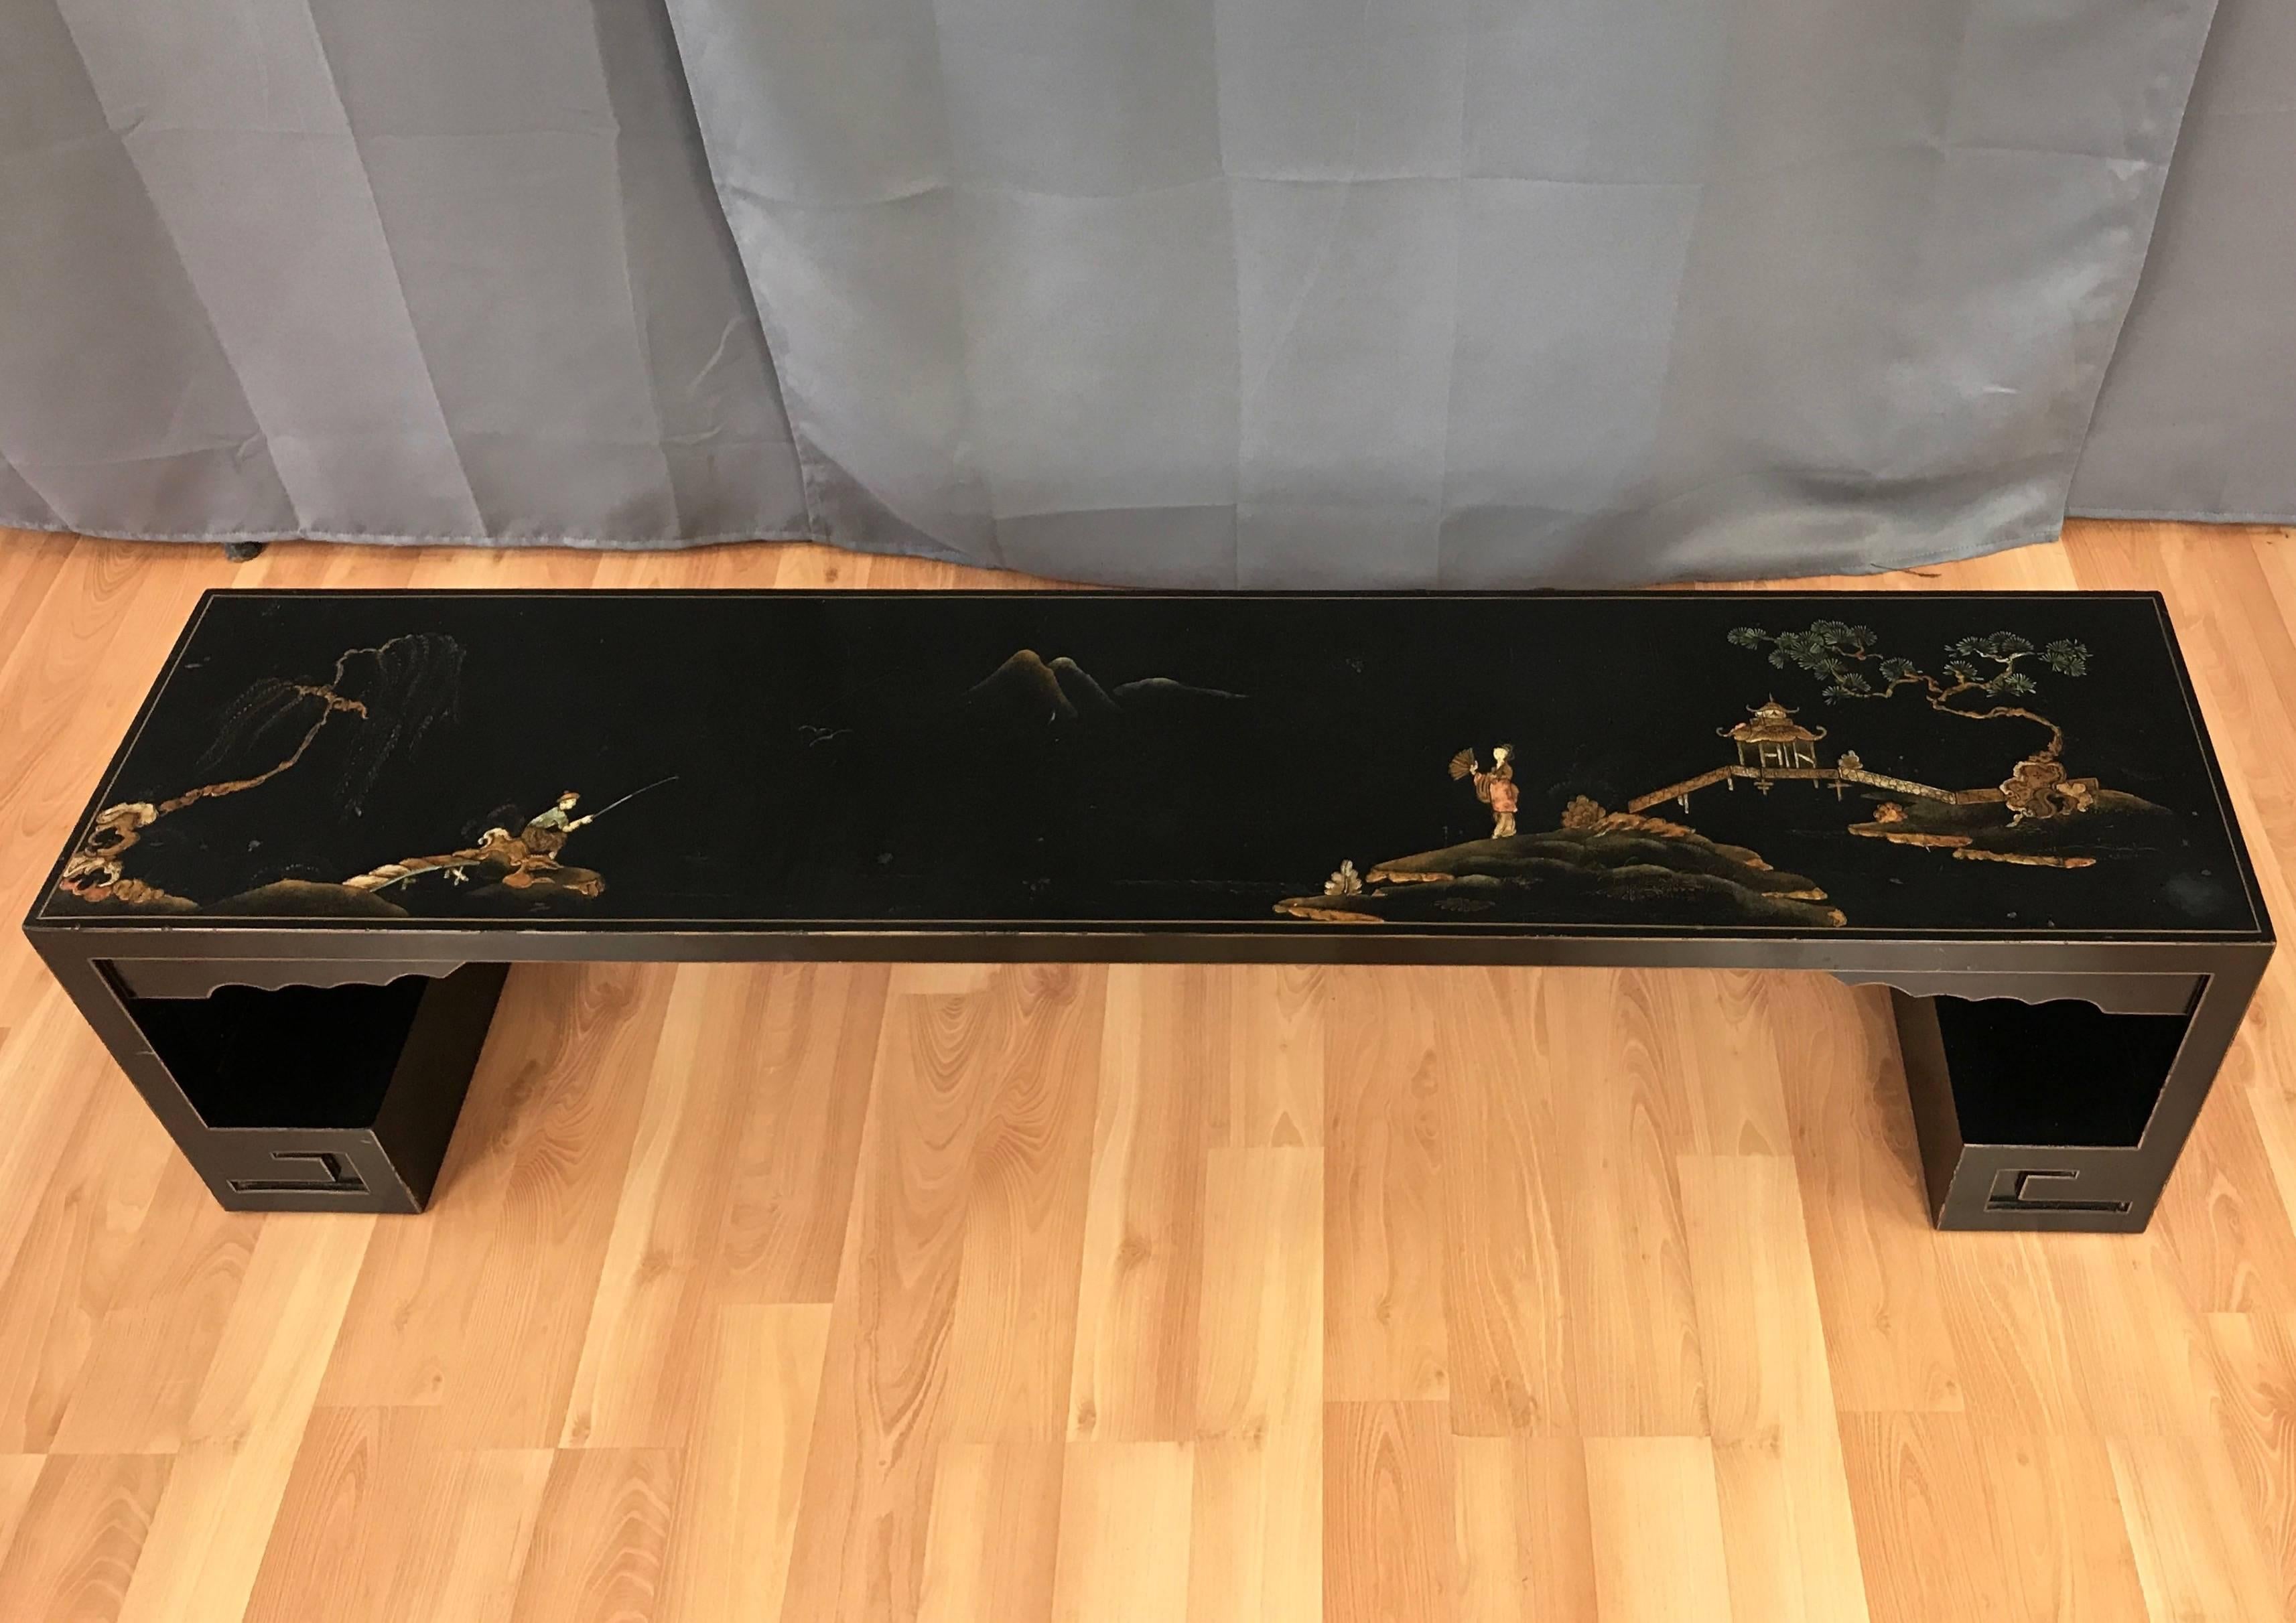 A vintage Japanese black lacquered bench with hand-painted decoration.

Long, low bench is finished in black lacquer with gold pinstriping. Grounded by robust Greek key-style feet, a design motif often seen in Meiji period pieces. Batwing-like